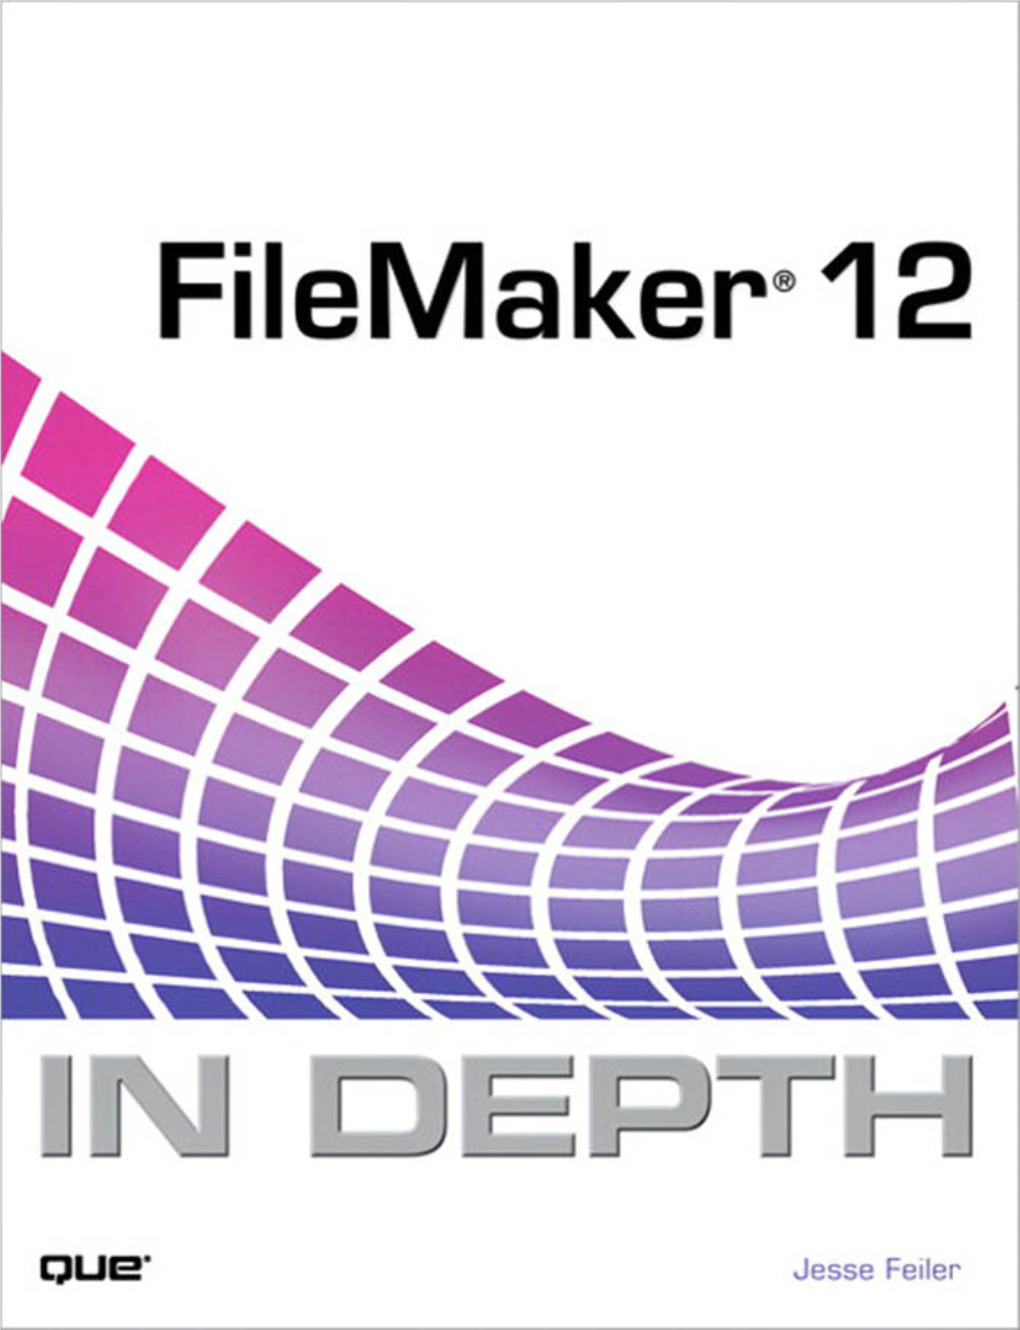 FILEMAKER® 12 in DEPTH Editor-In-Chief Greg Wiegand Copyright © 2012 by Pearson Education, Inc